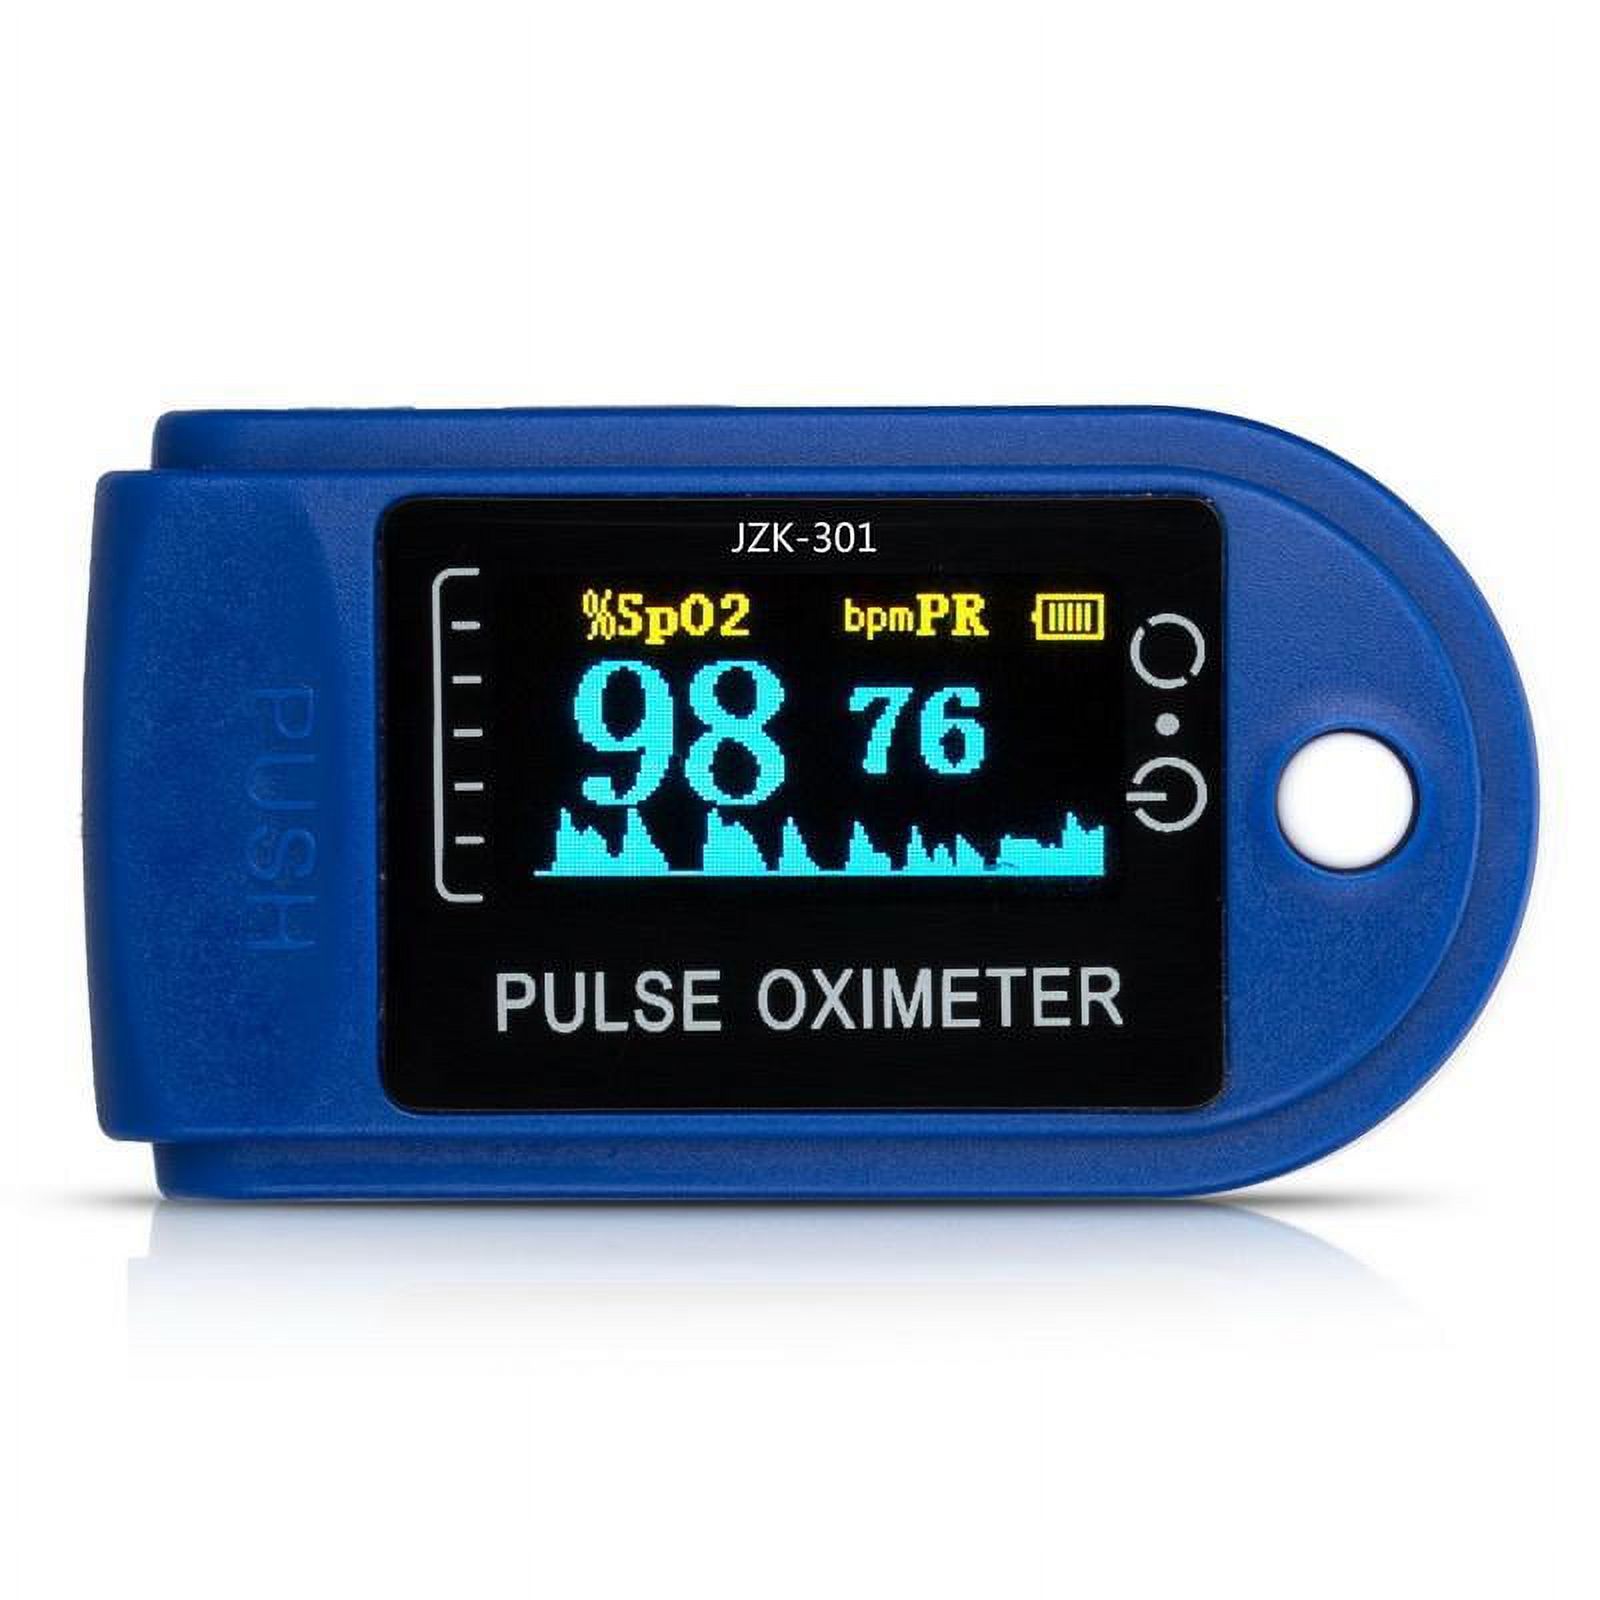 Finger Pulse Oximeter Blood Oxygen Saturation SpO2 Heart Rate O2 Monitor CE - Blue, New - image 1 of 11